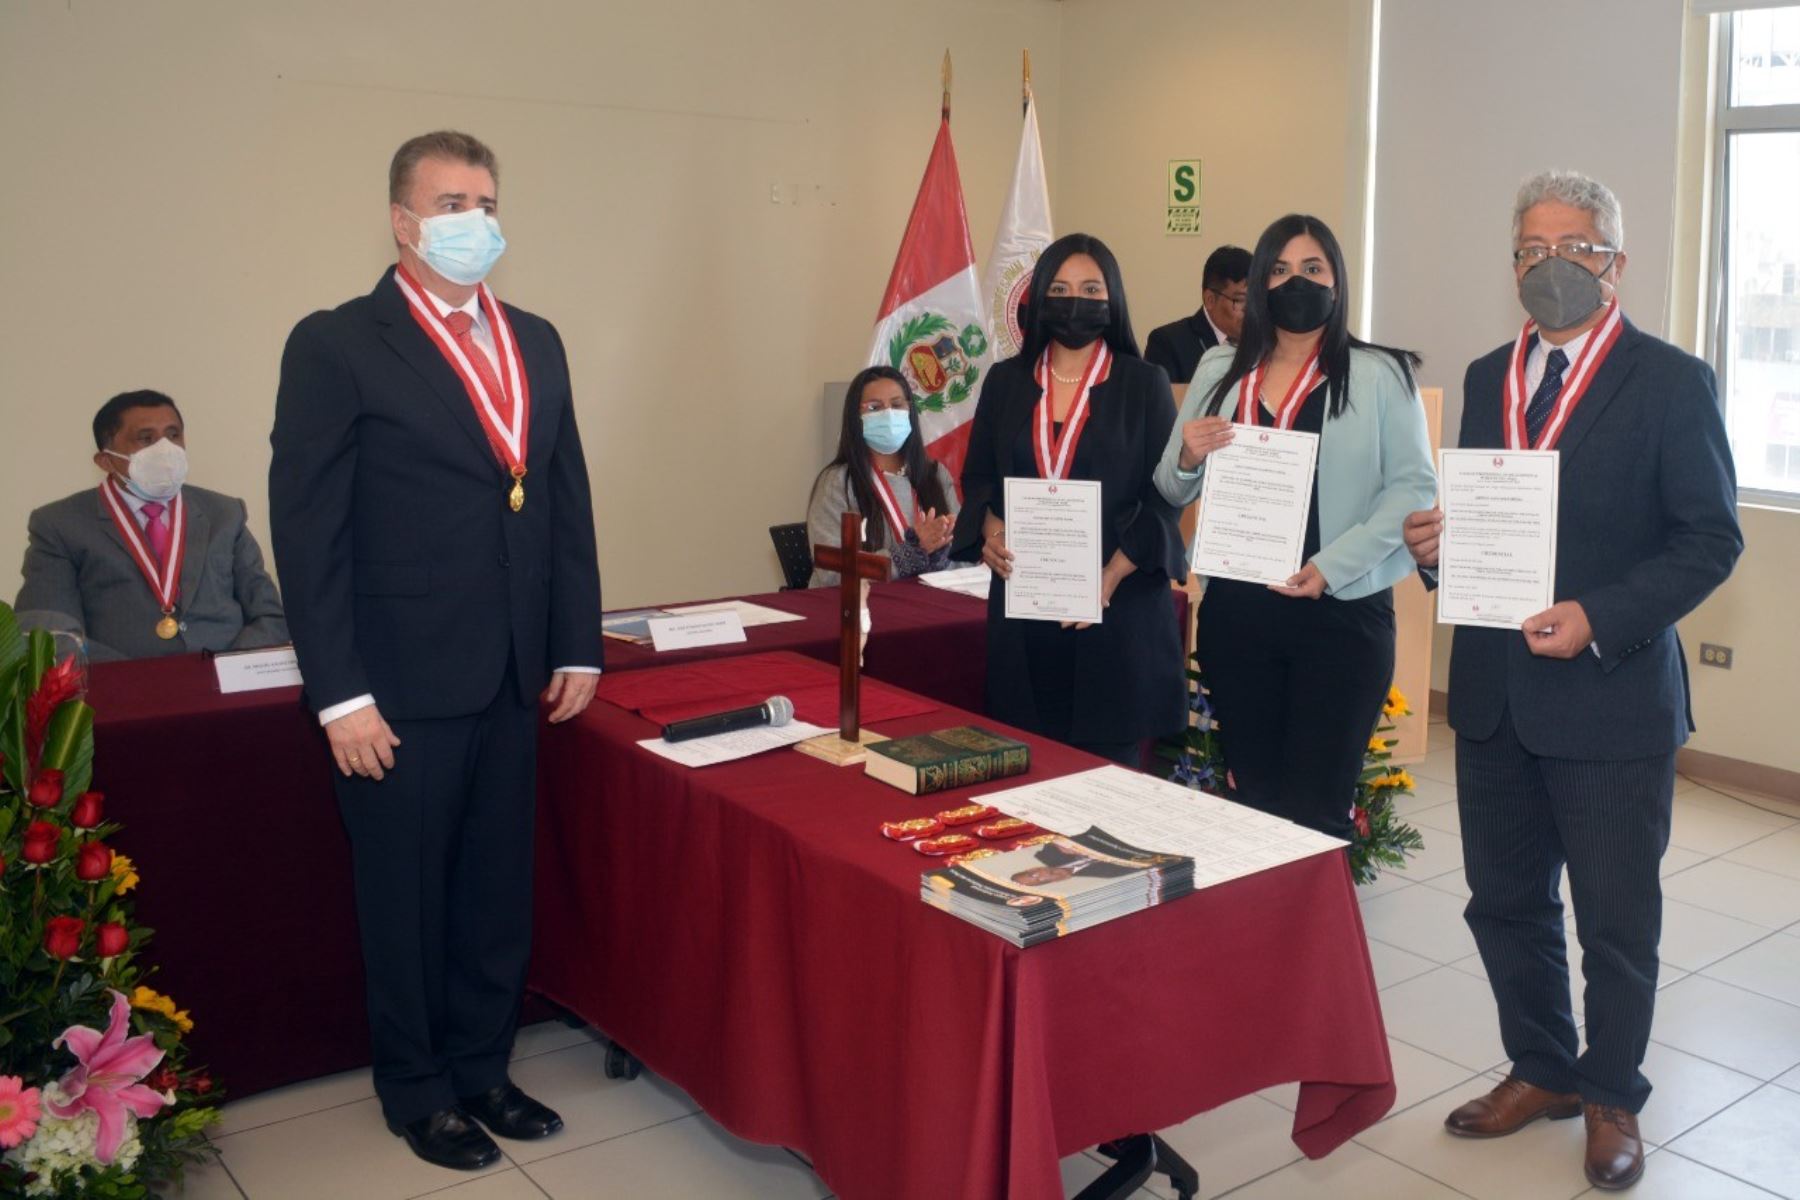 New board of directors of the College of Public Relations of Peru sworn in thumbnail